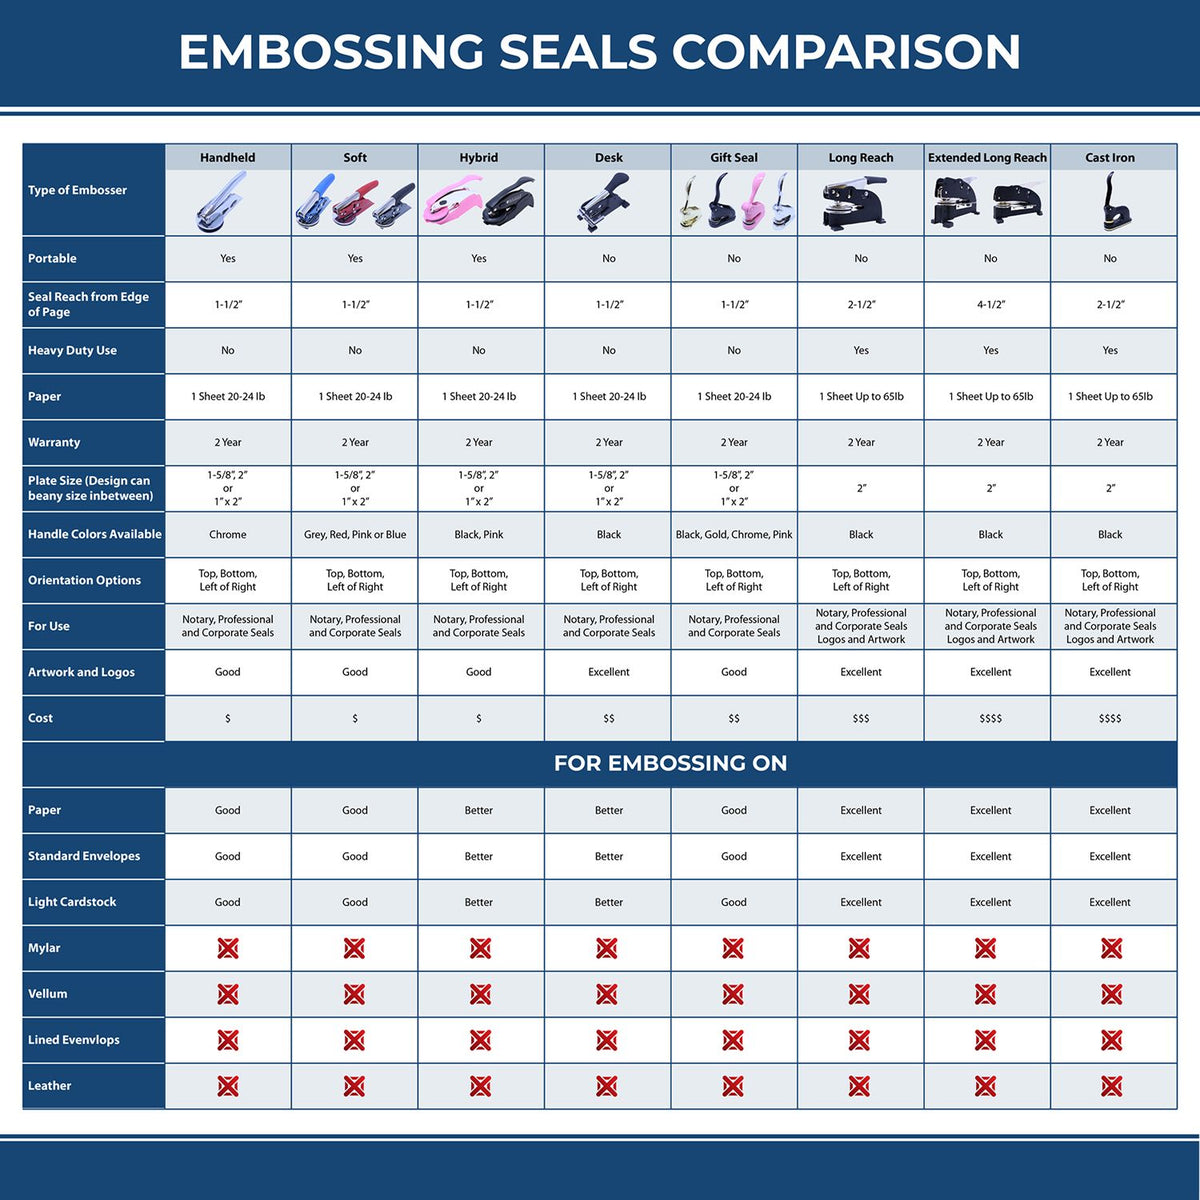 A comparison chart for the different types of mount models available for the State of South Dakota Soft Land Surveyor Embossing Seal.